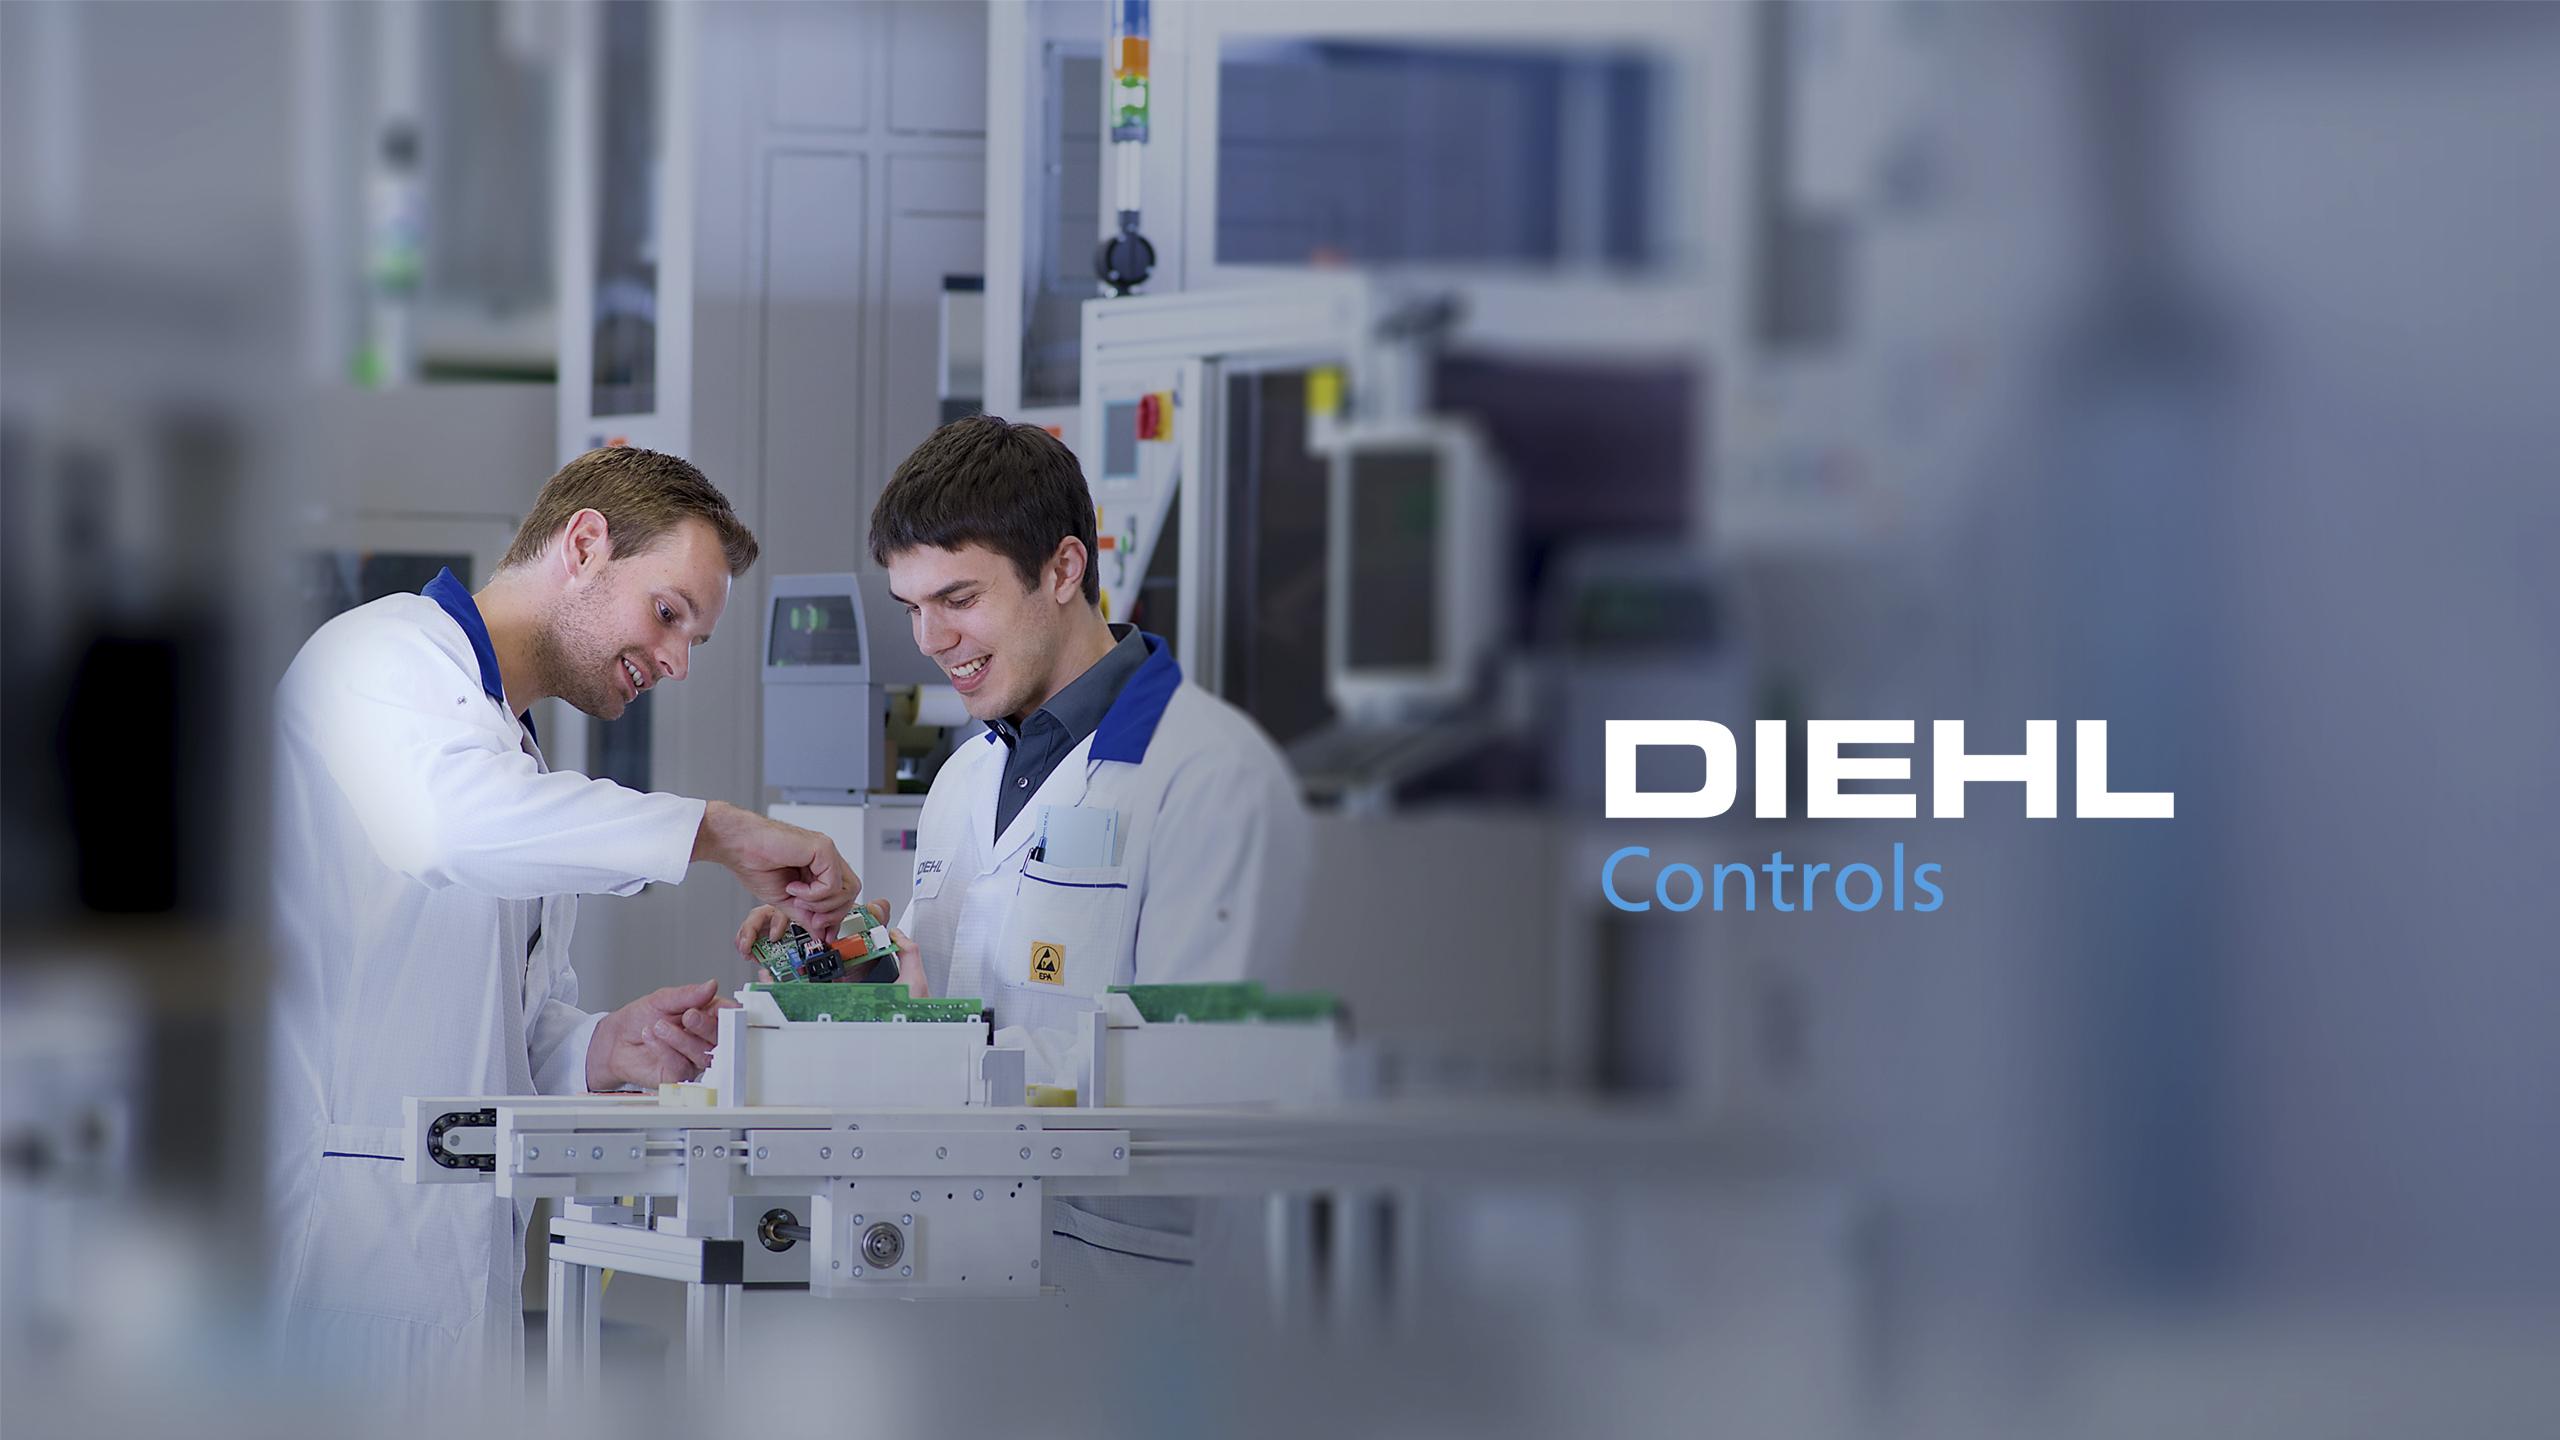 Product Touch on Metal - Control | Diehl Controls image